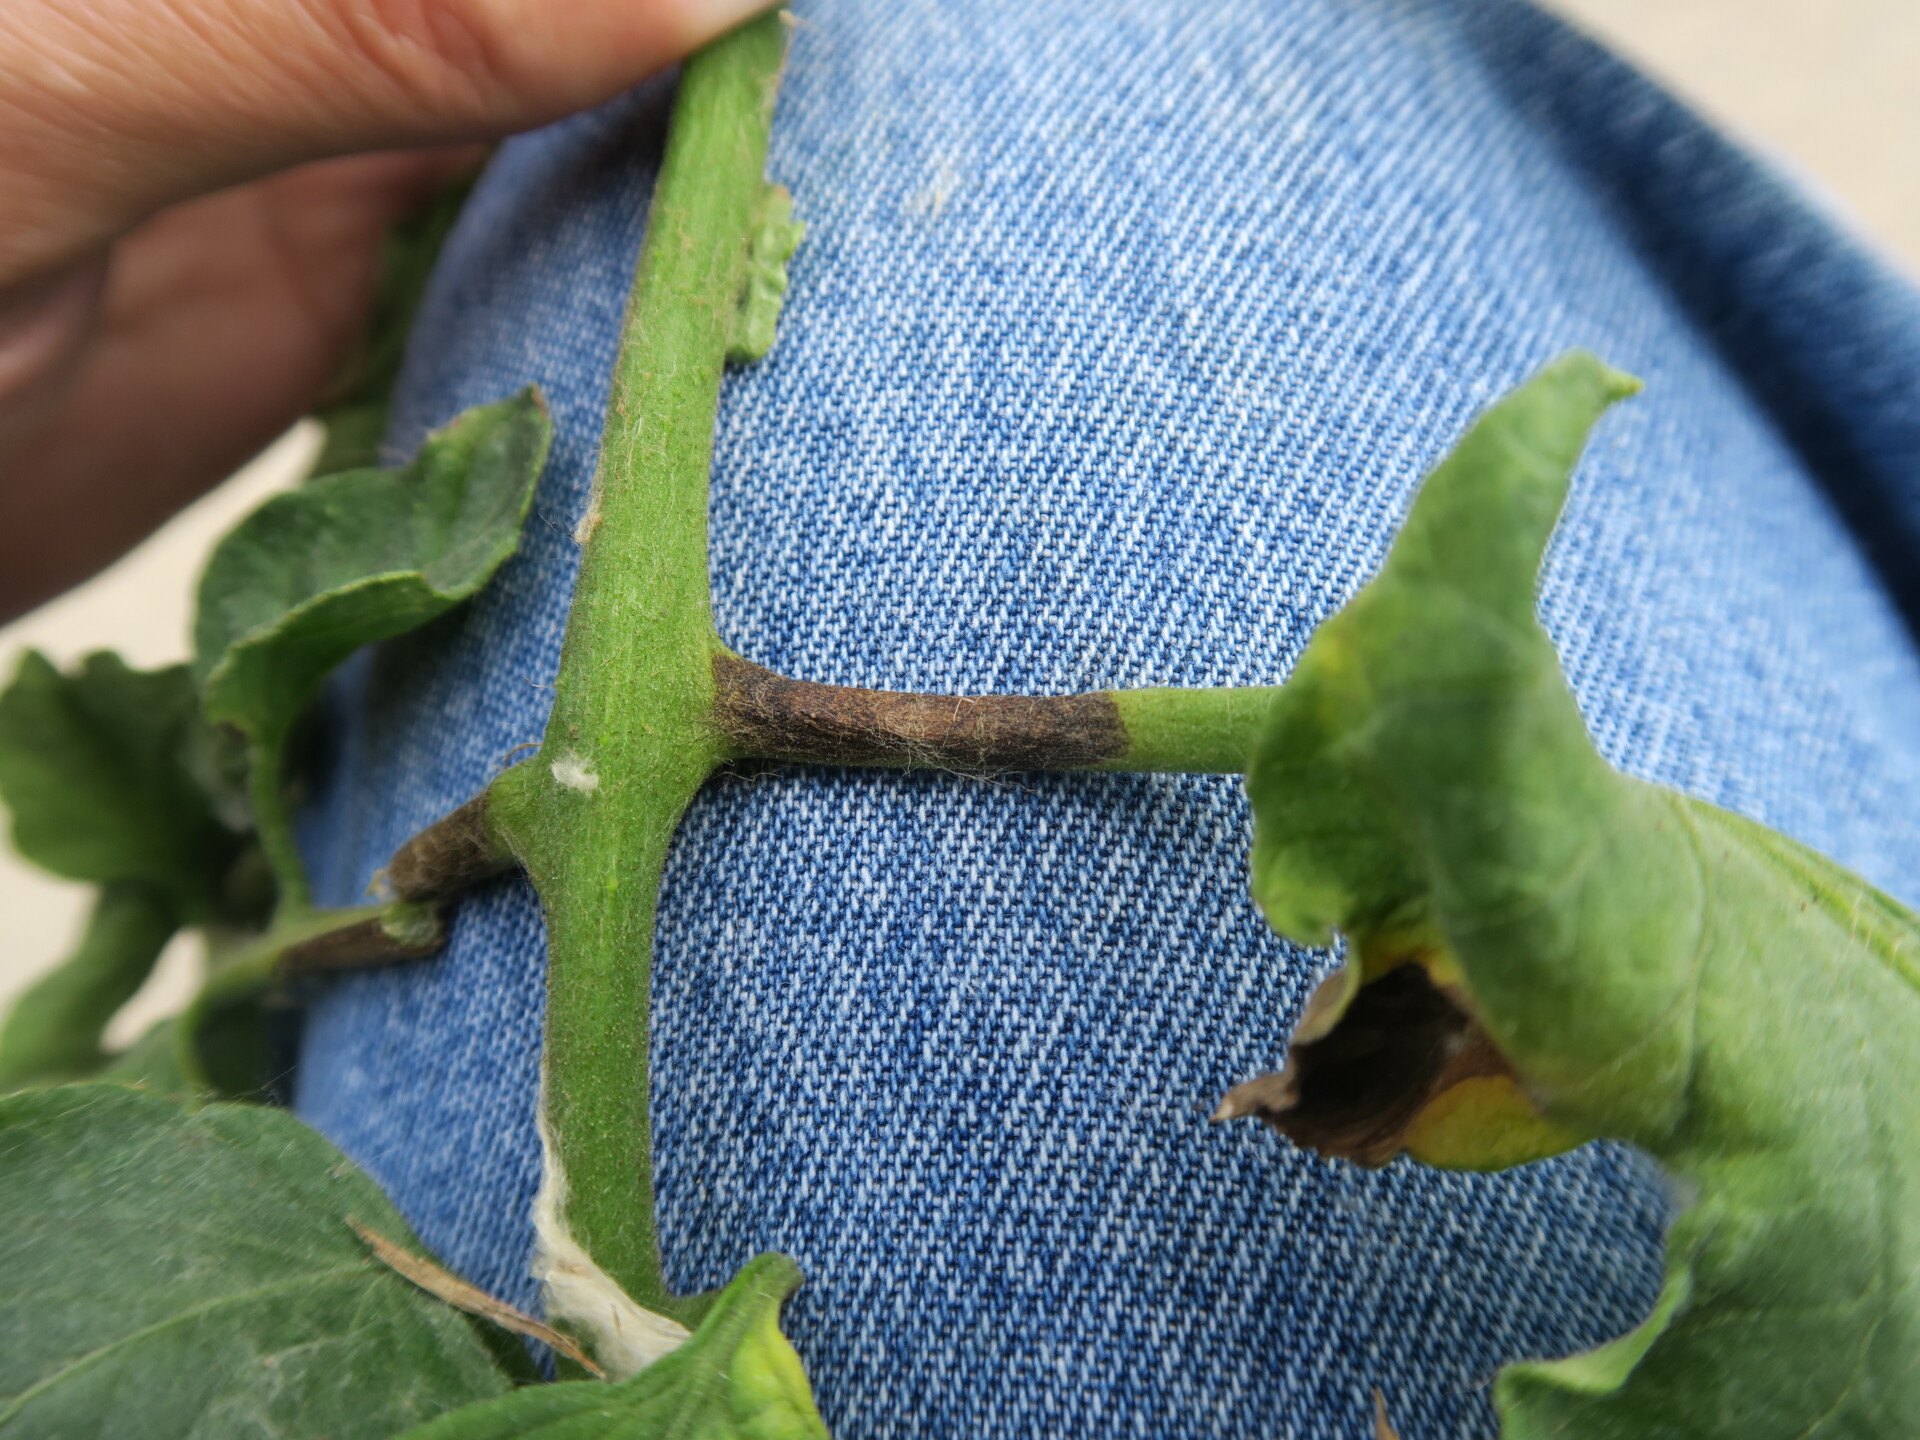 Figure 2. Petiole lesion of early blight of tomato.